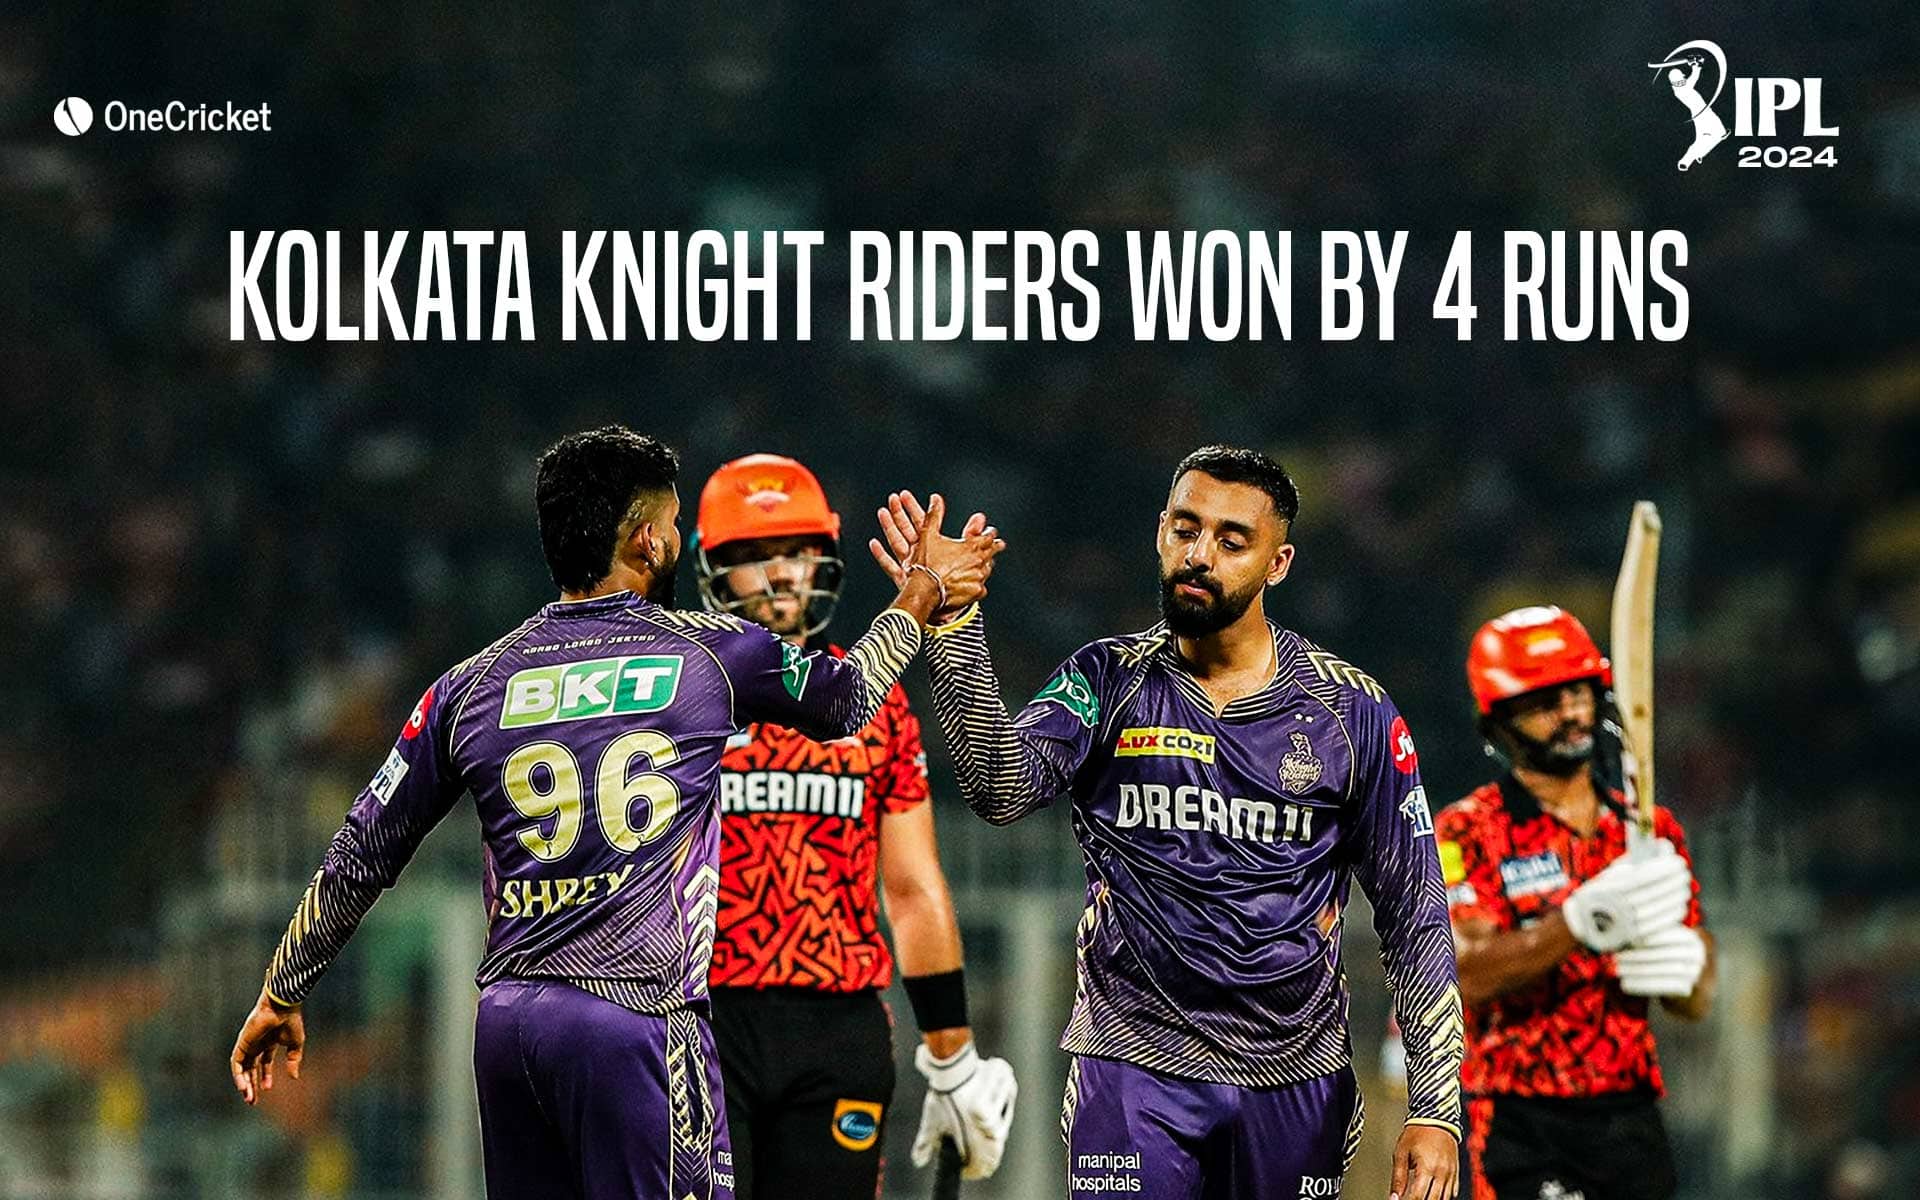 Kolkata Knight Riders secured a victory by 4 runs (Source: OneCricket)